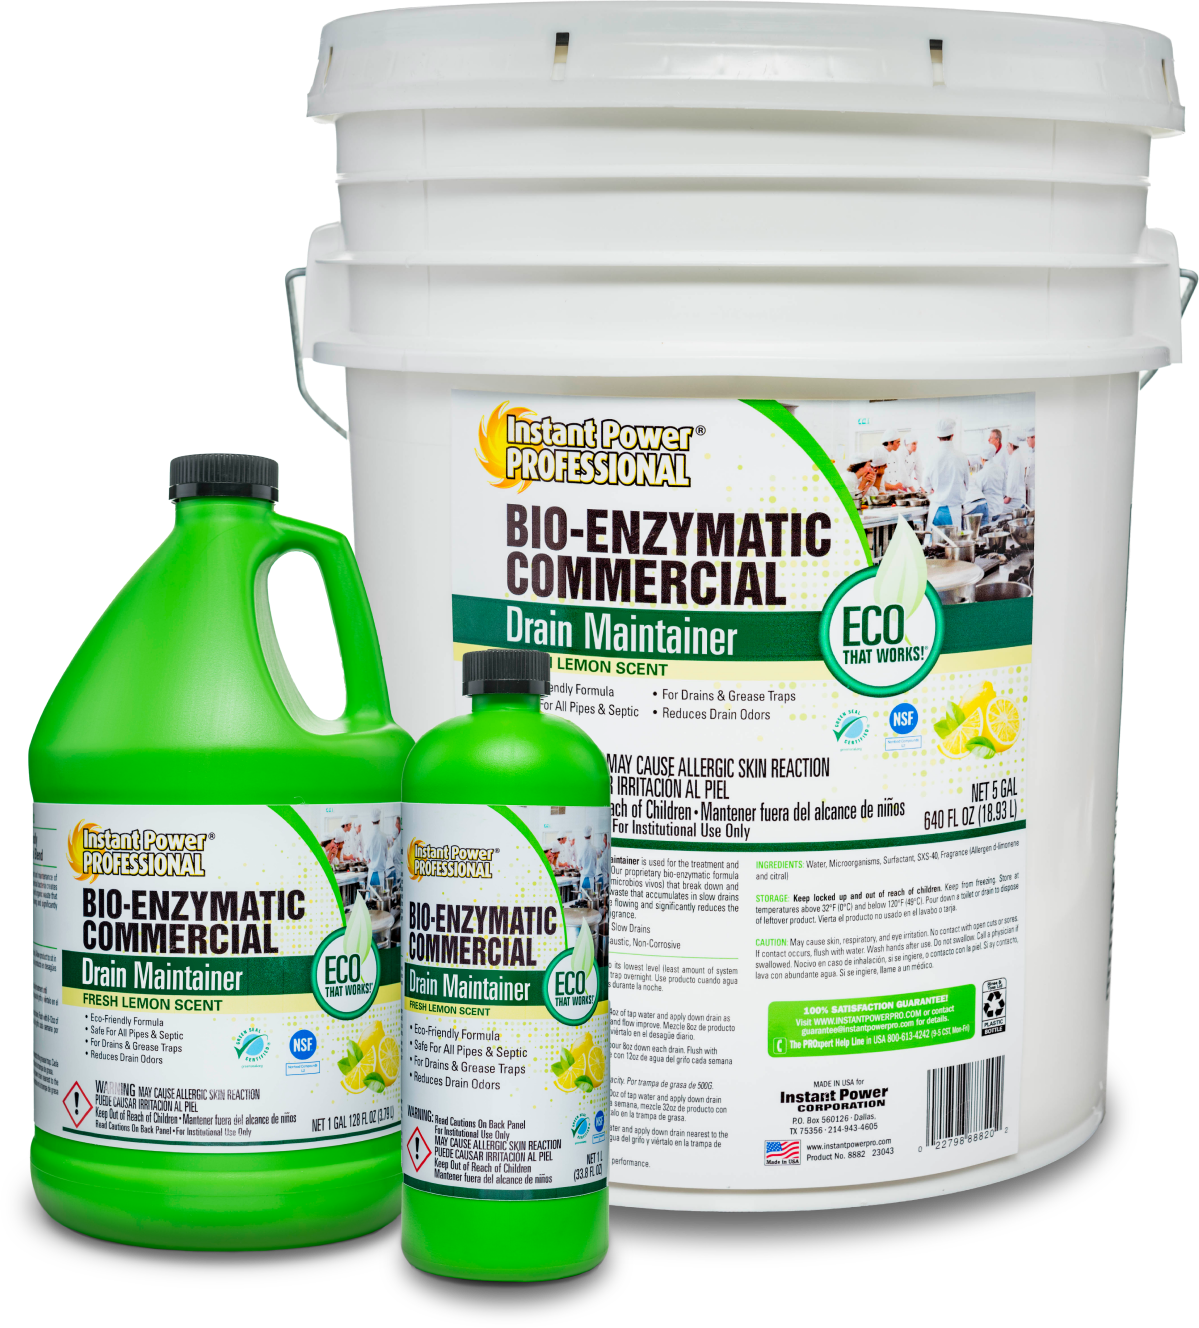 Bio-Enzymatic Commercial Drain Maintainer